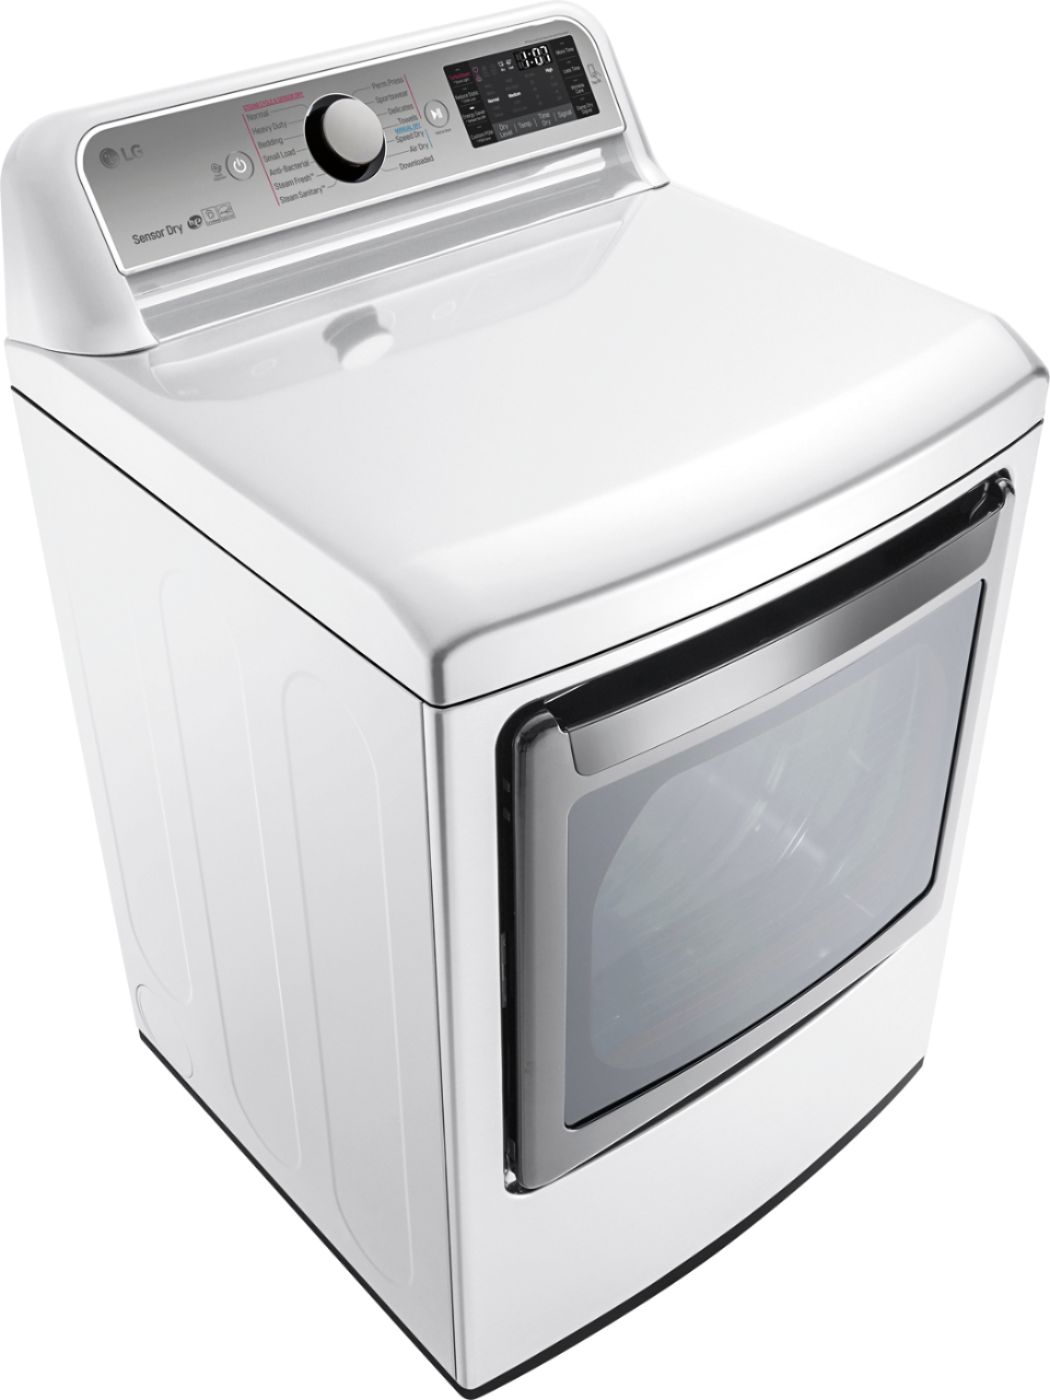 Angle View: LG - 7.3 Cu. Ft. 14-Cycle Electric Dryer with Steam - White